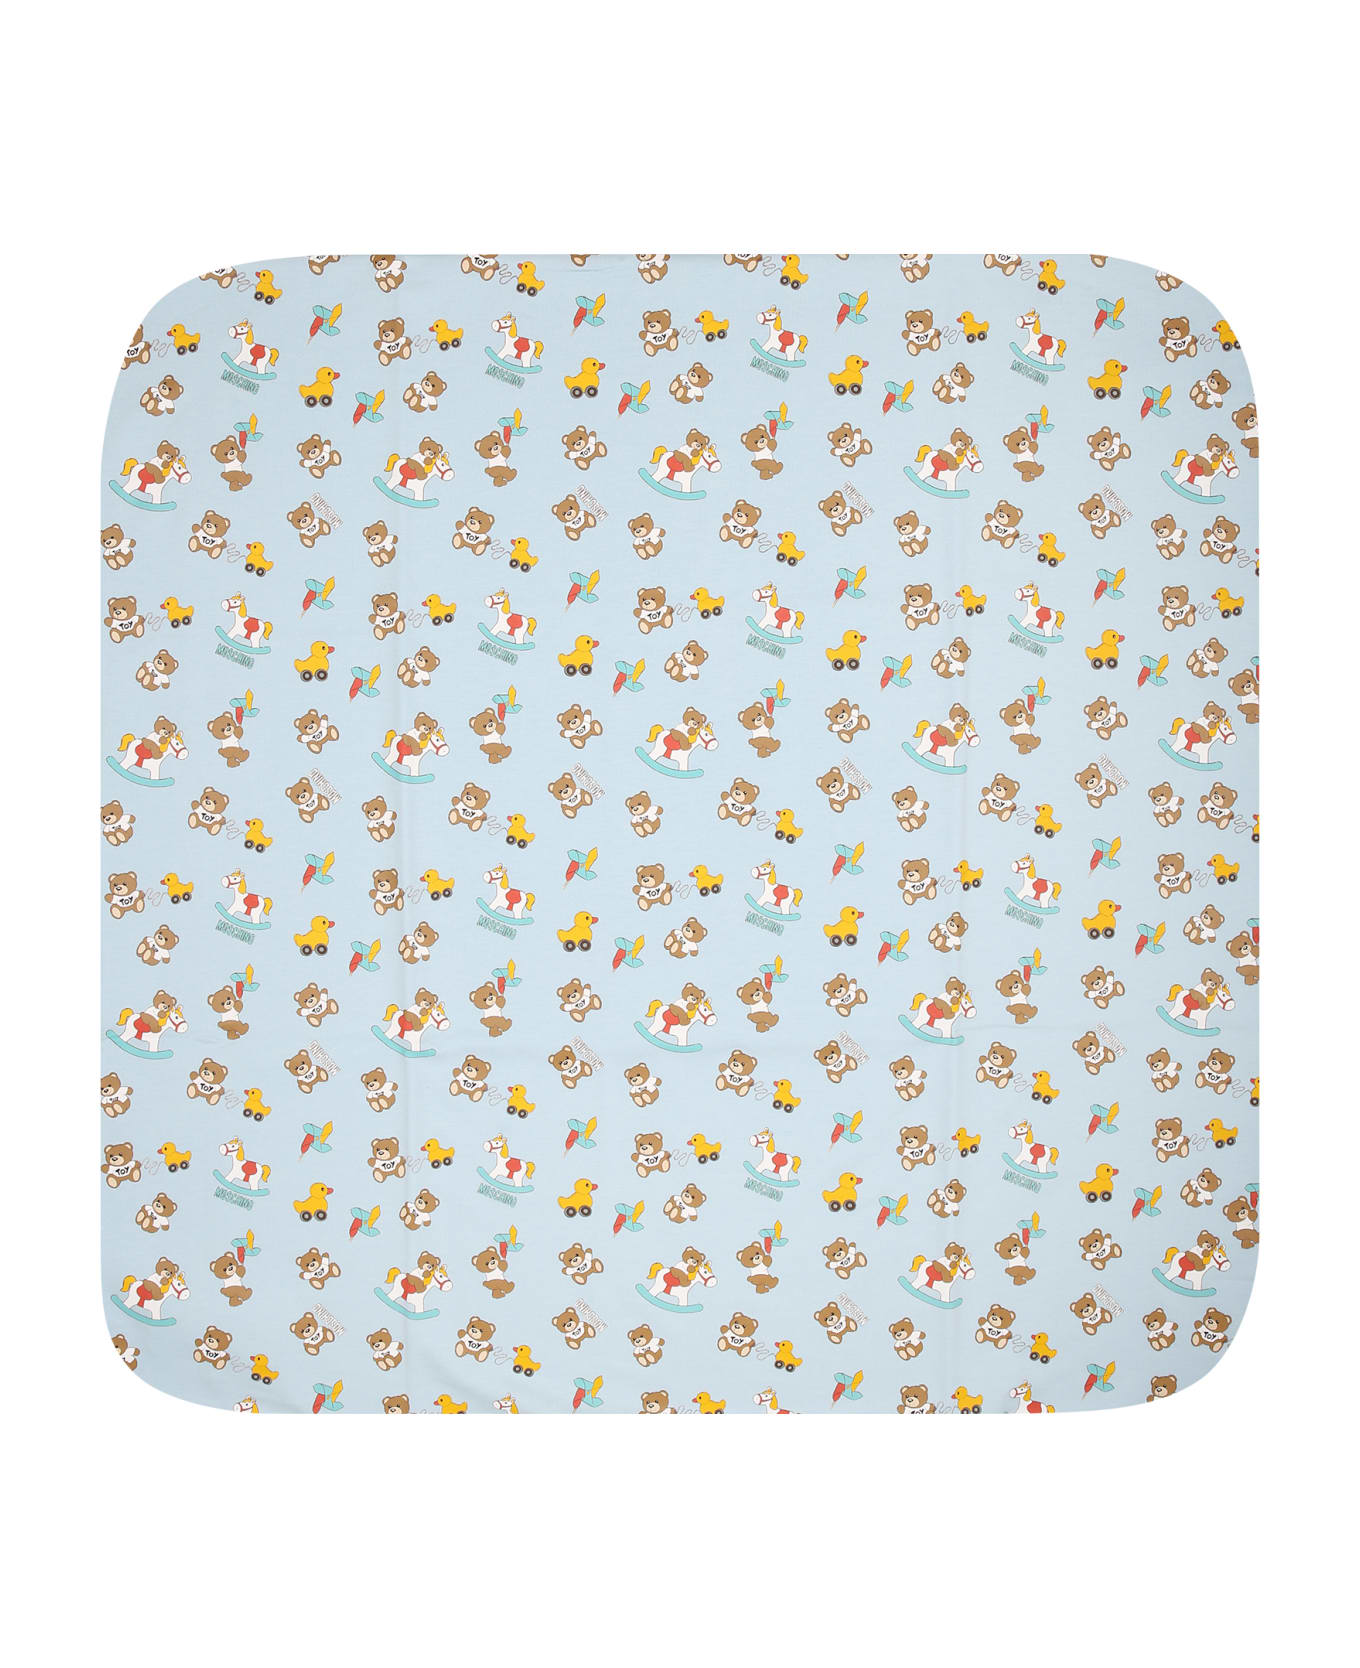 Moschino Light Blue Baby Boy Blanket With All-over Pattern - Light Blue